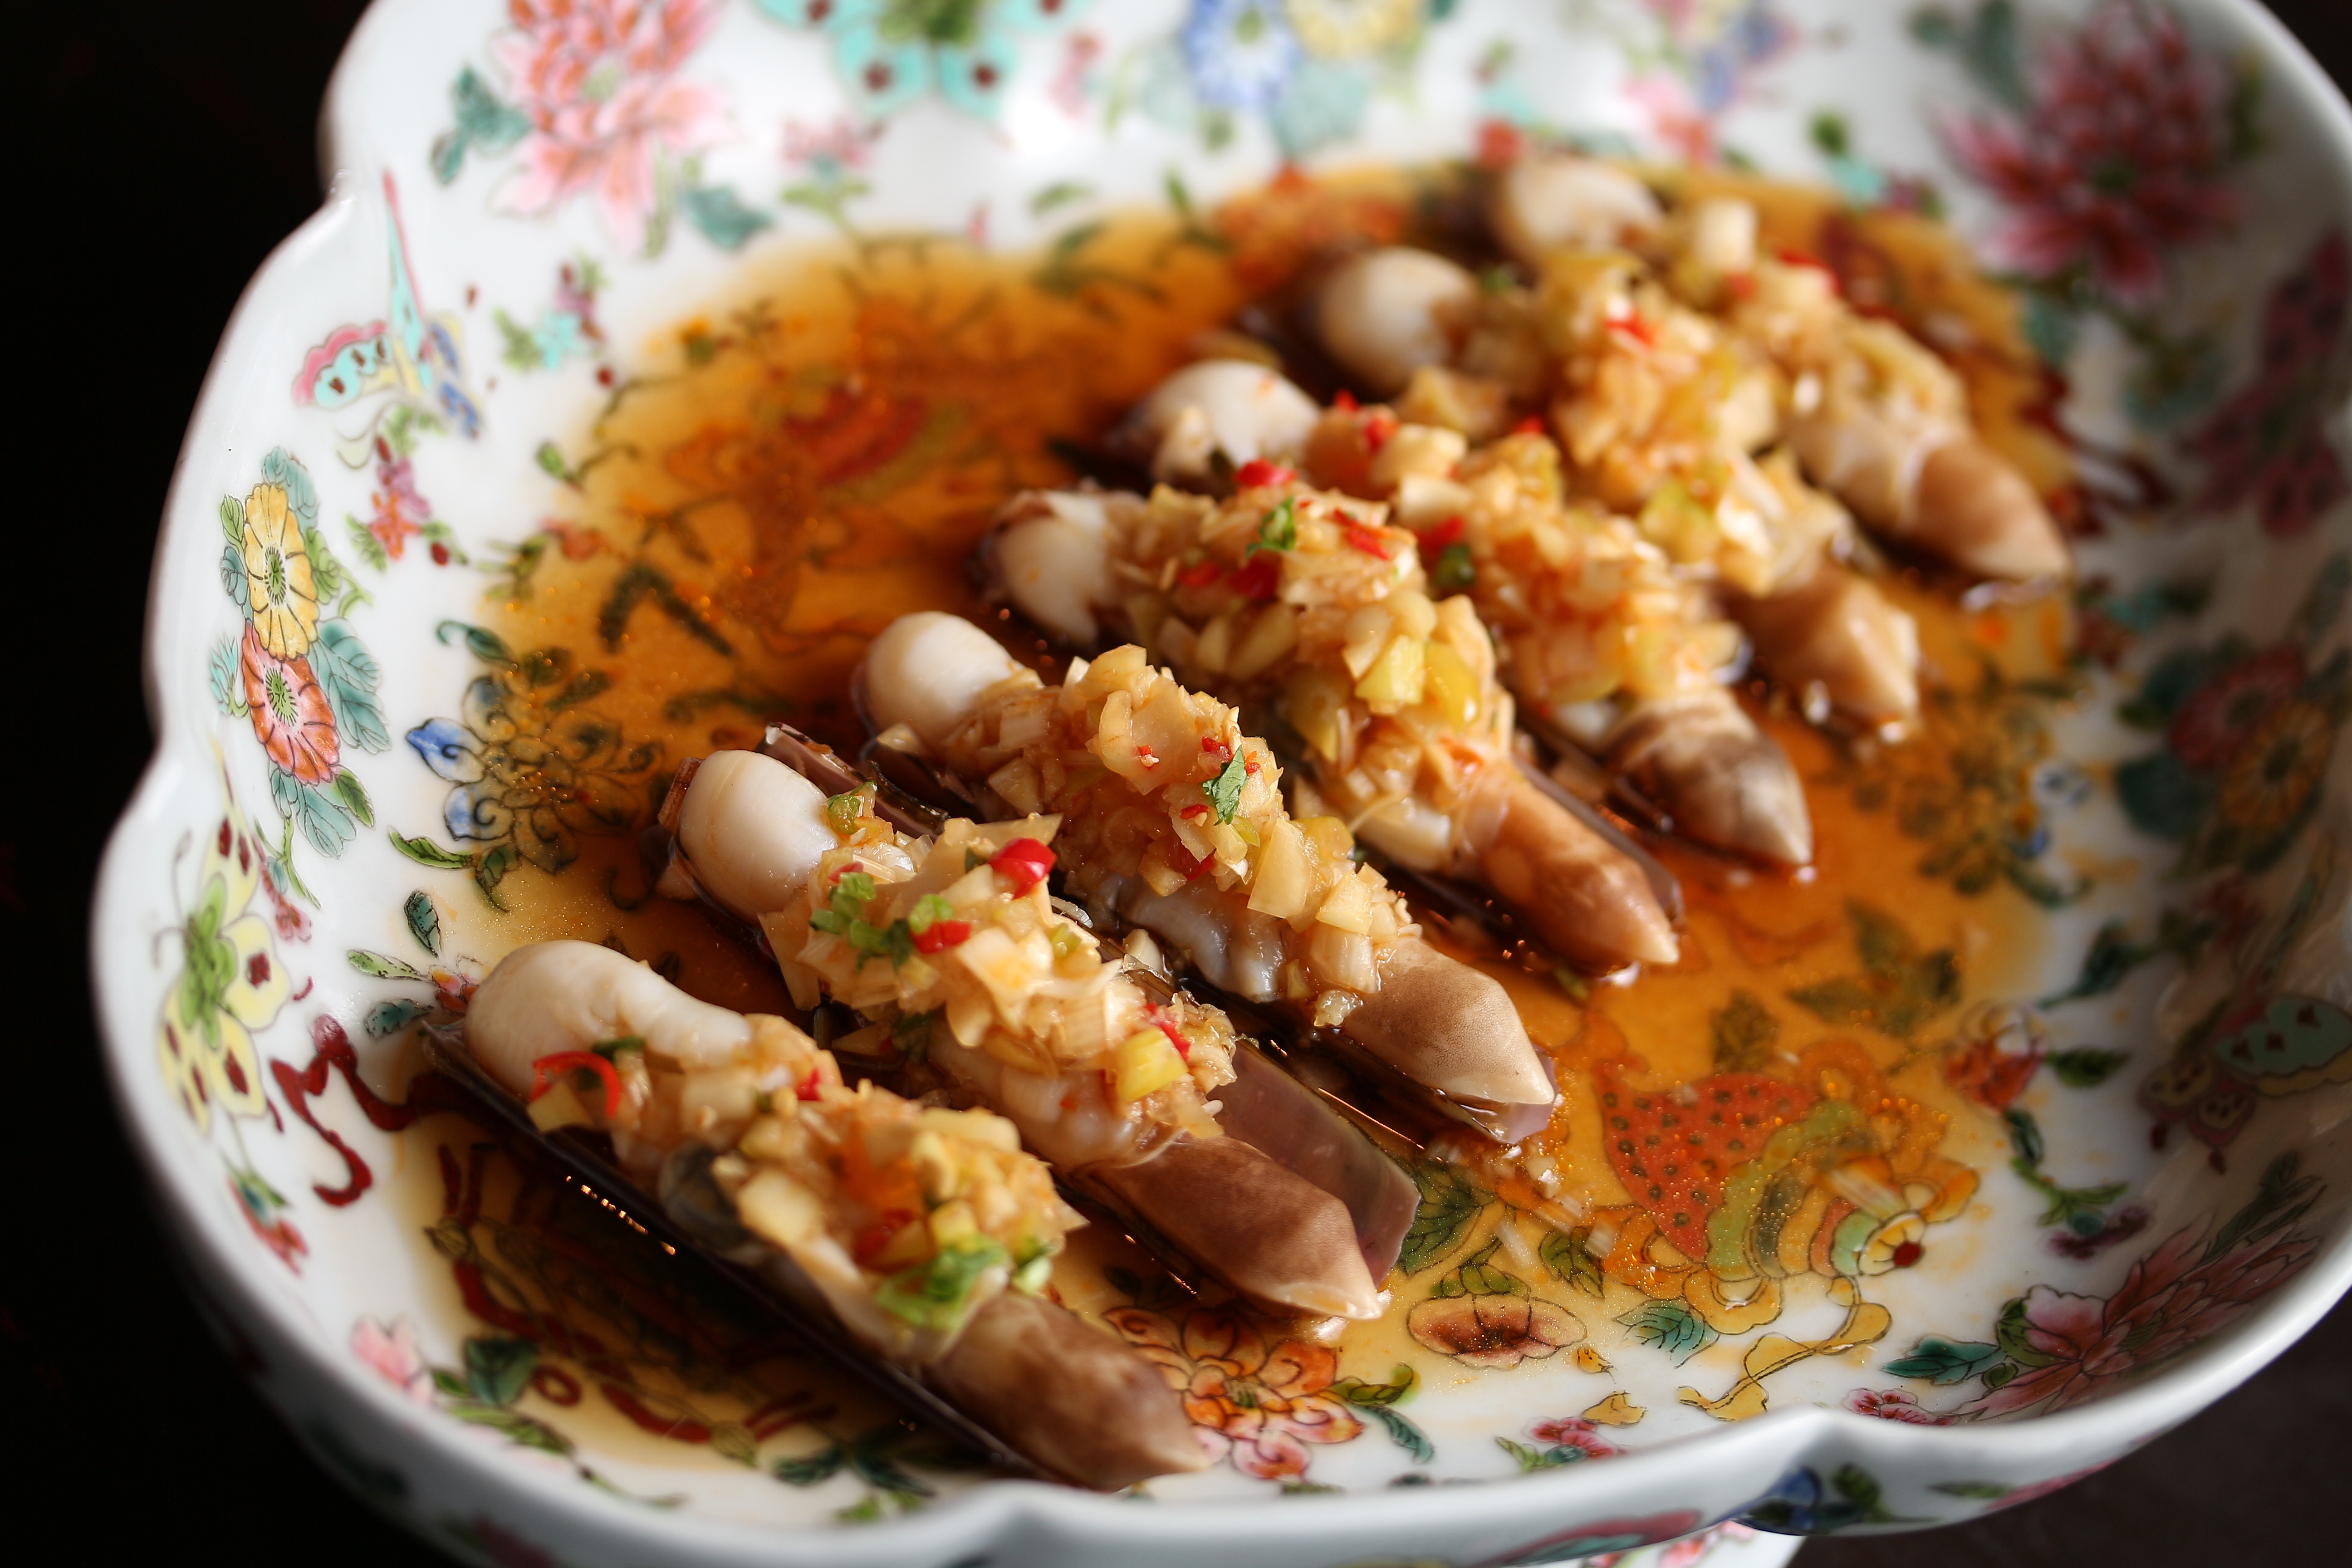 Chilled spiced razor clams steeped in Chinese rose wine